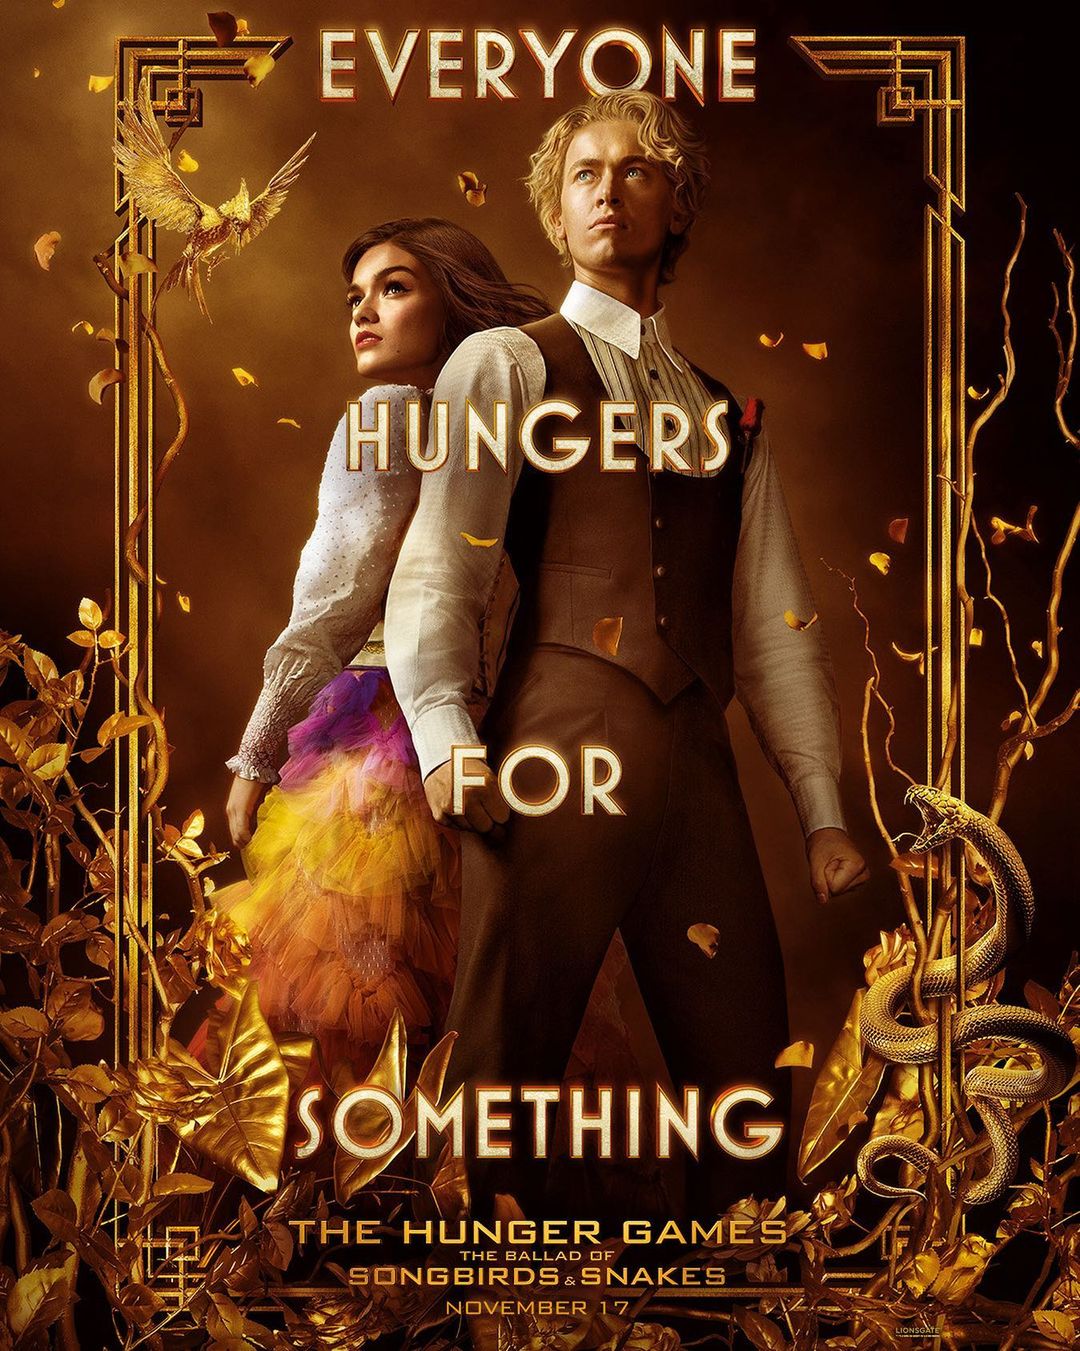 The Hunger Games: The Ballad of Songbirds and Snakes Movie (2023) Cast, Release Date, Story, Budget, Collection, Poster, Trailer, Review